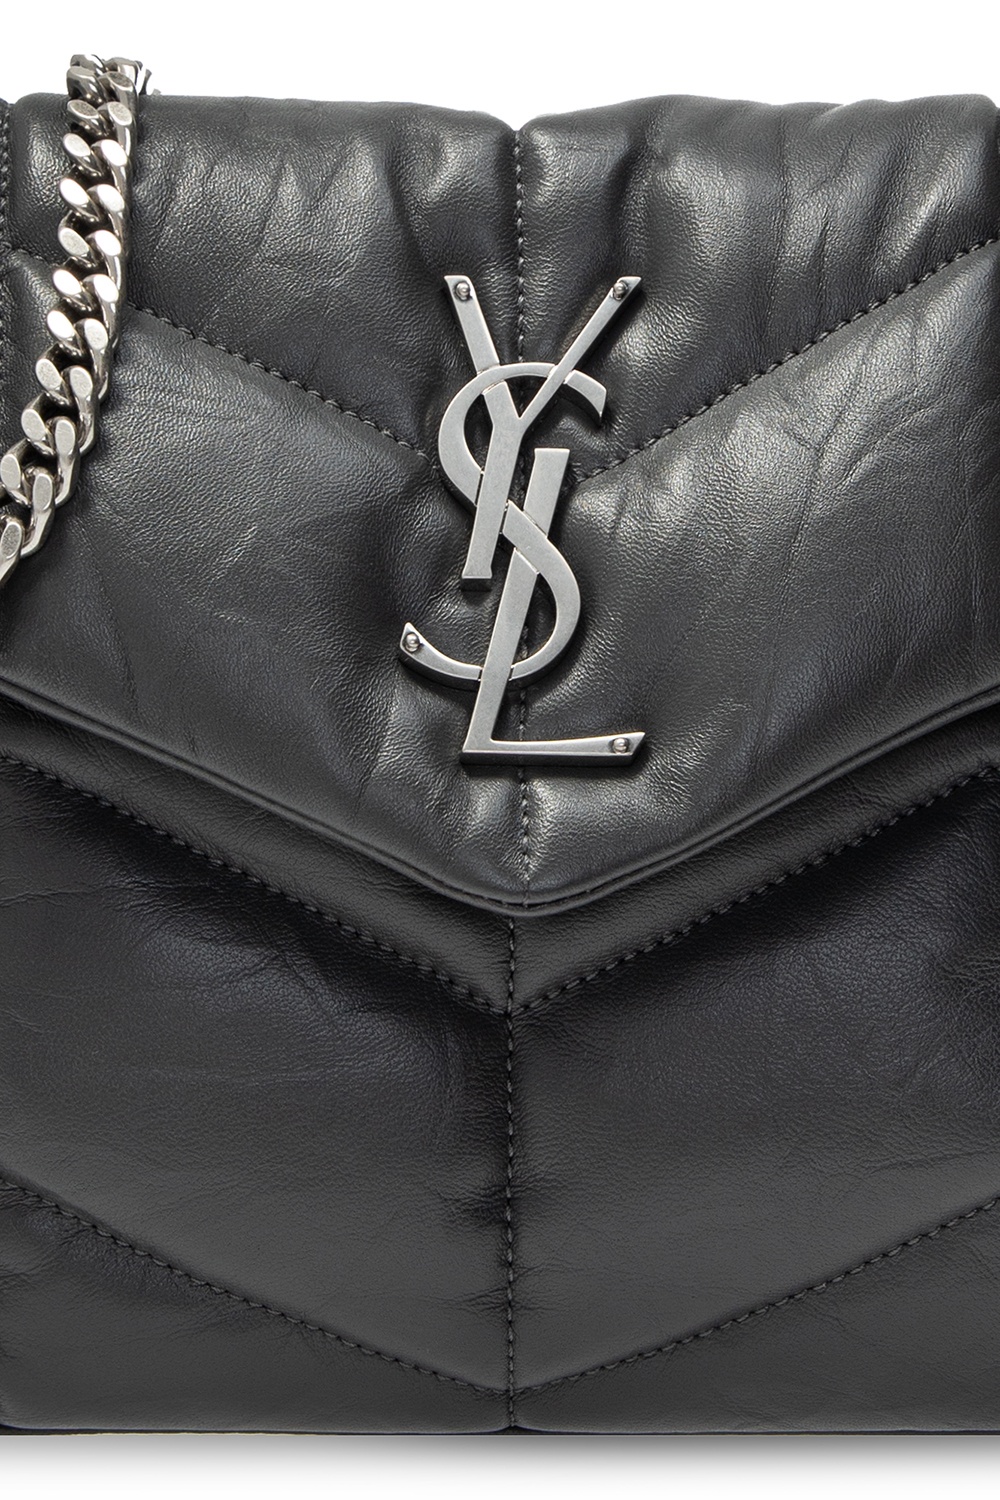 Saint Laurent Quilted Wool Loulou Puffer Shoulder Bag (SHF-19271) – LuxeDH